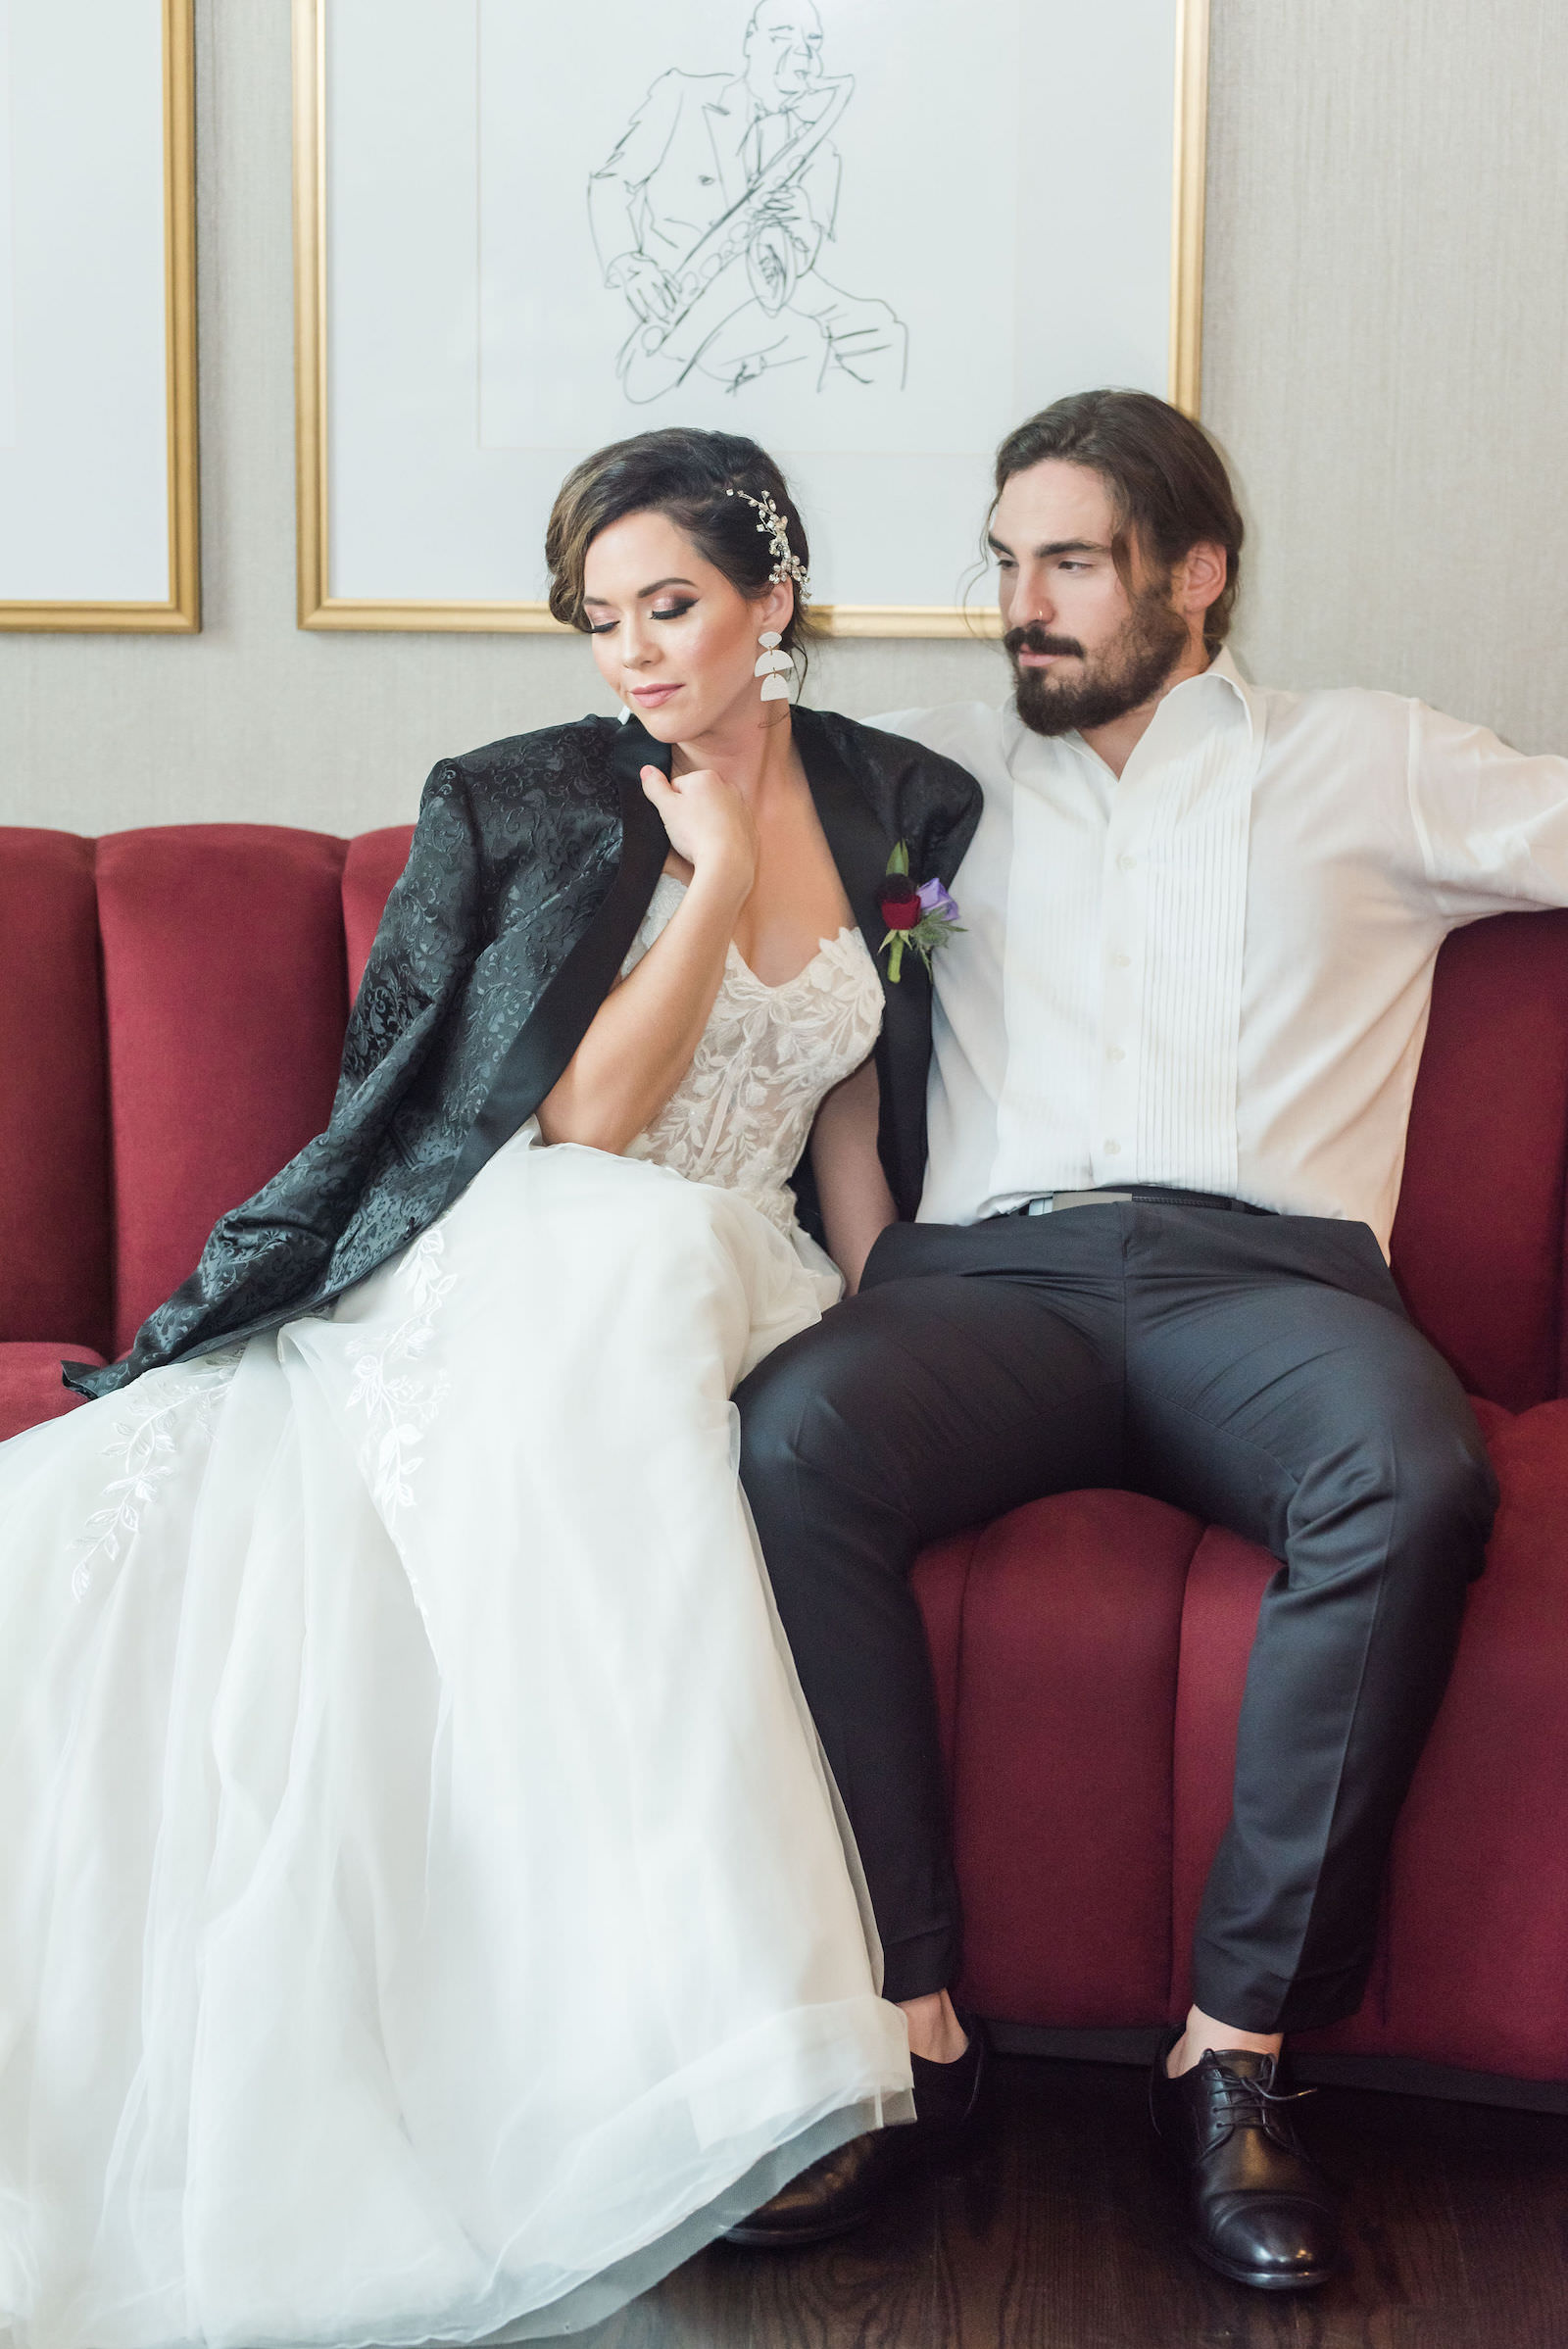 Modern Rock N Roll Bride Wearing Groom Custom Leather Suit Jacket Sitting on Red Tufted Couch with Groom | Tampa Bay Wedding Photographer Amanda Zabrocki Photography